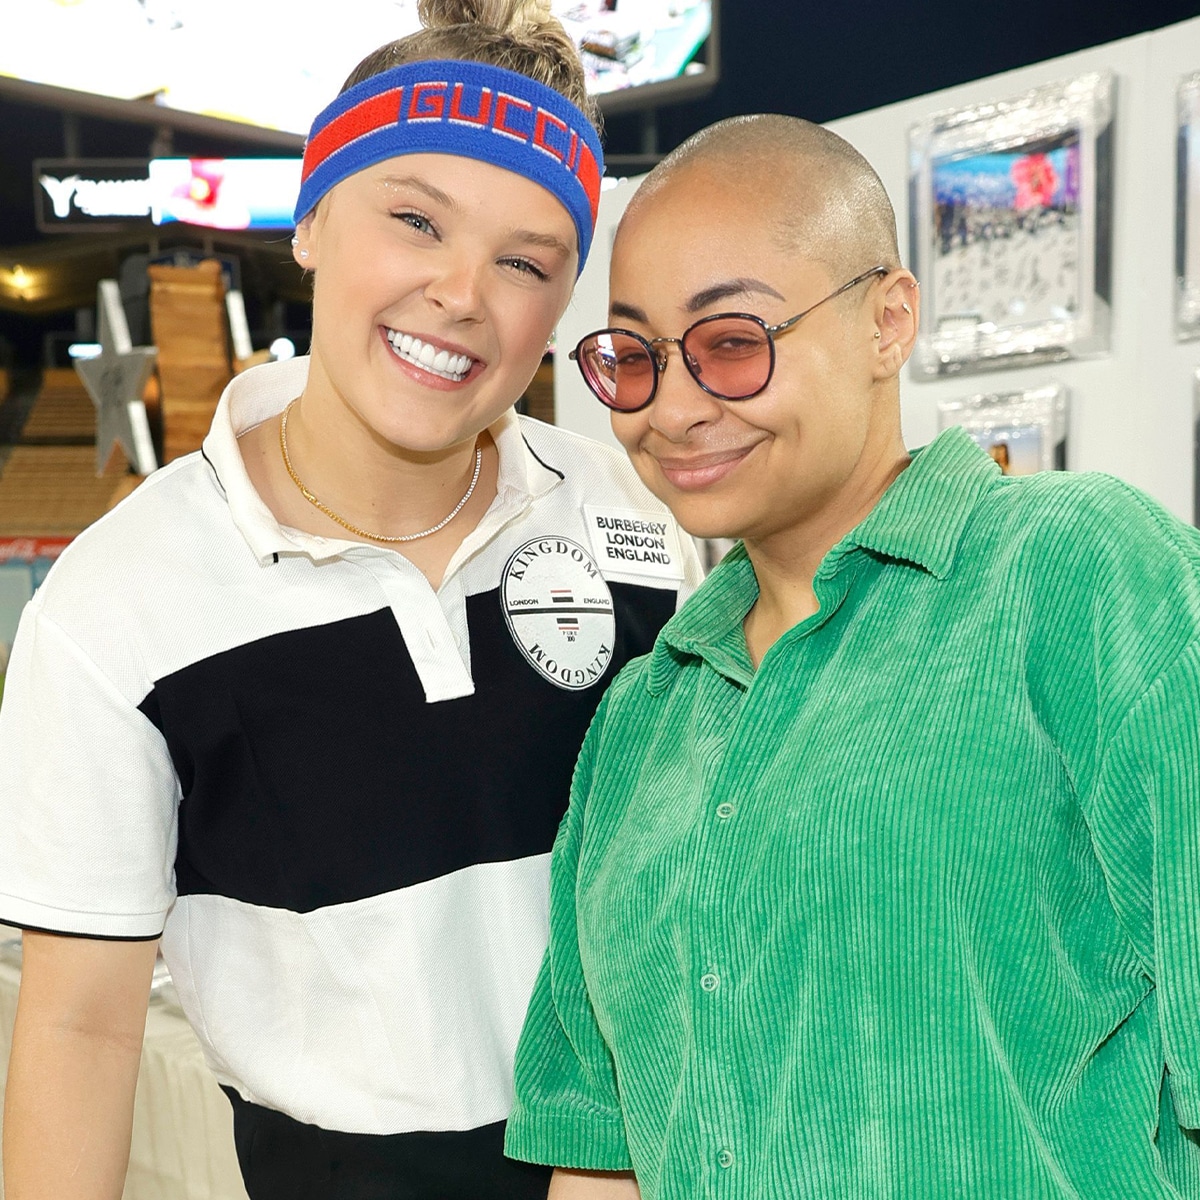 JoJo Siwa Gets Her First Tattoo During Outing With Raven-Symoné